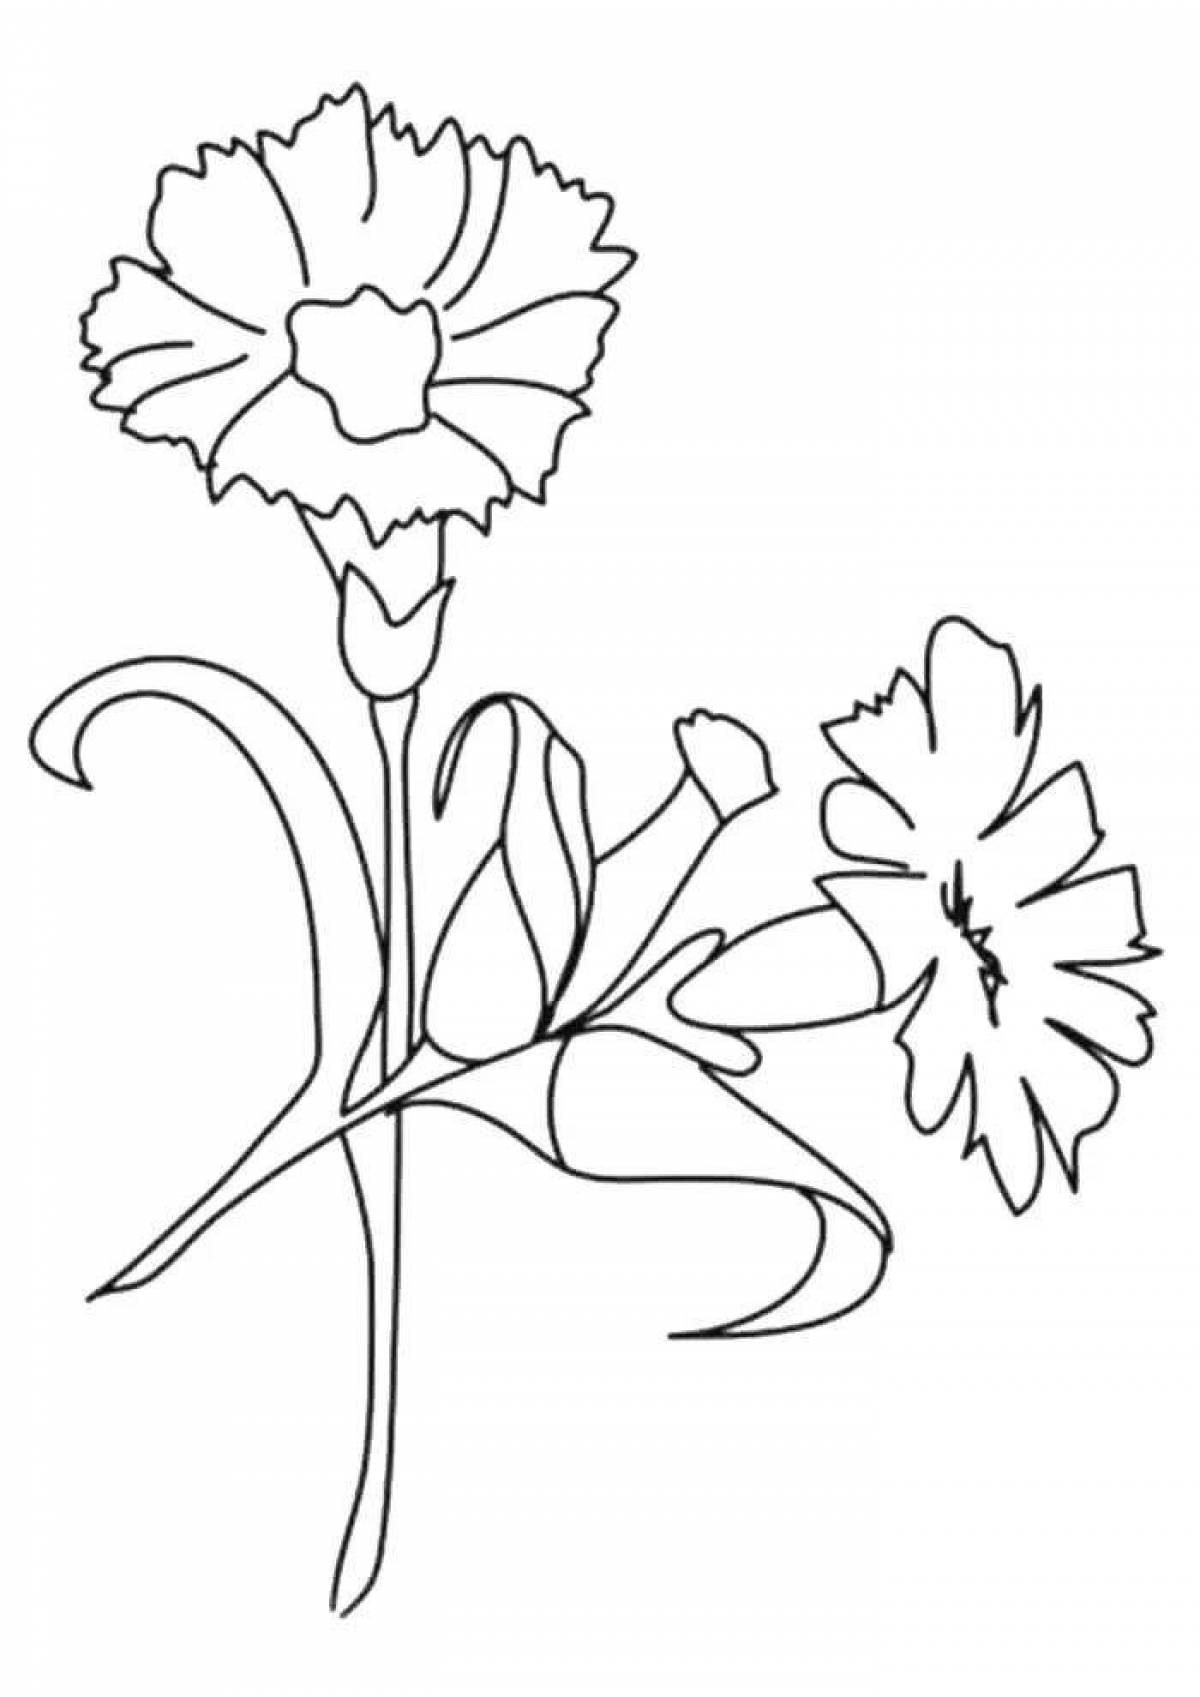 Playful coloring of carnation flowers